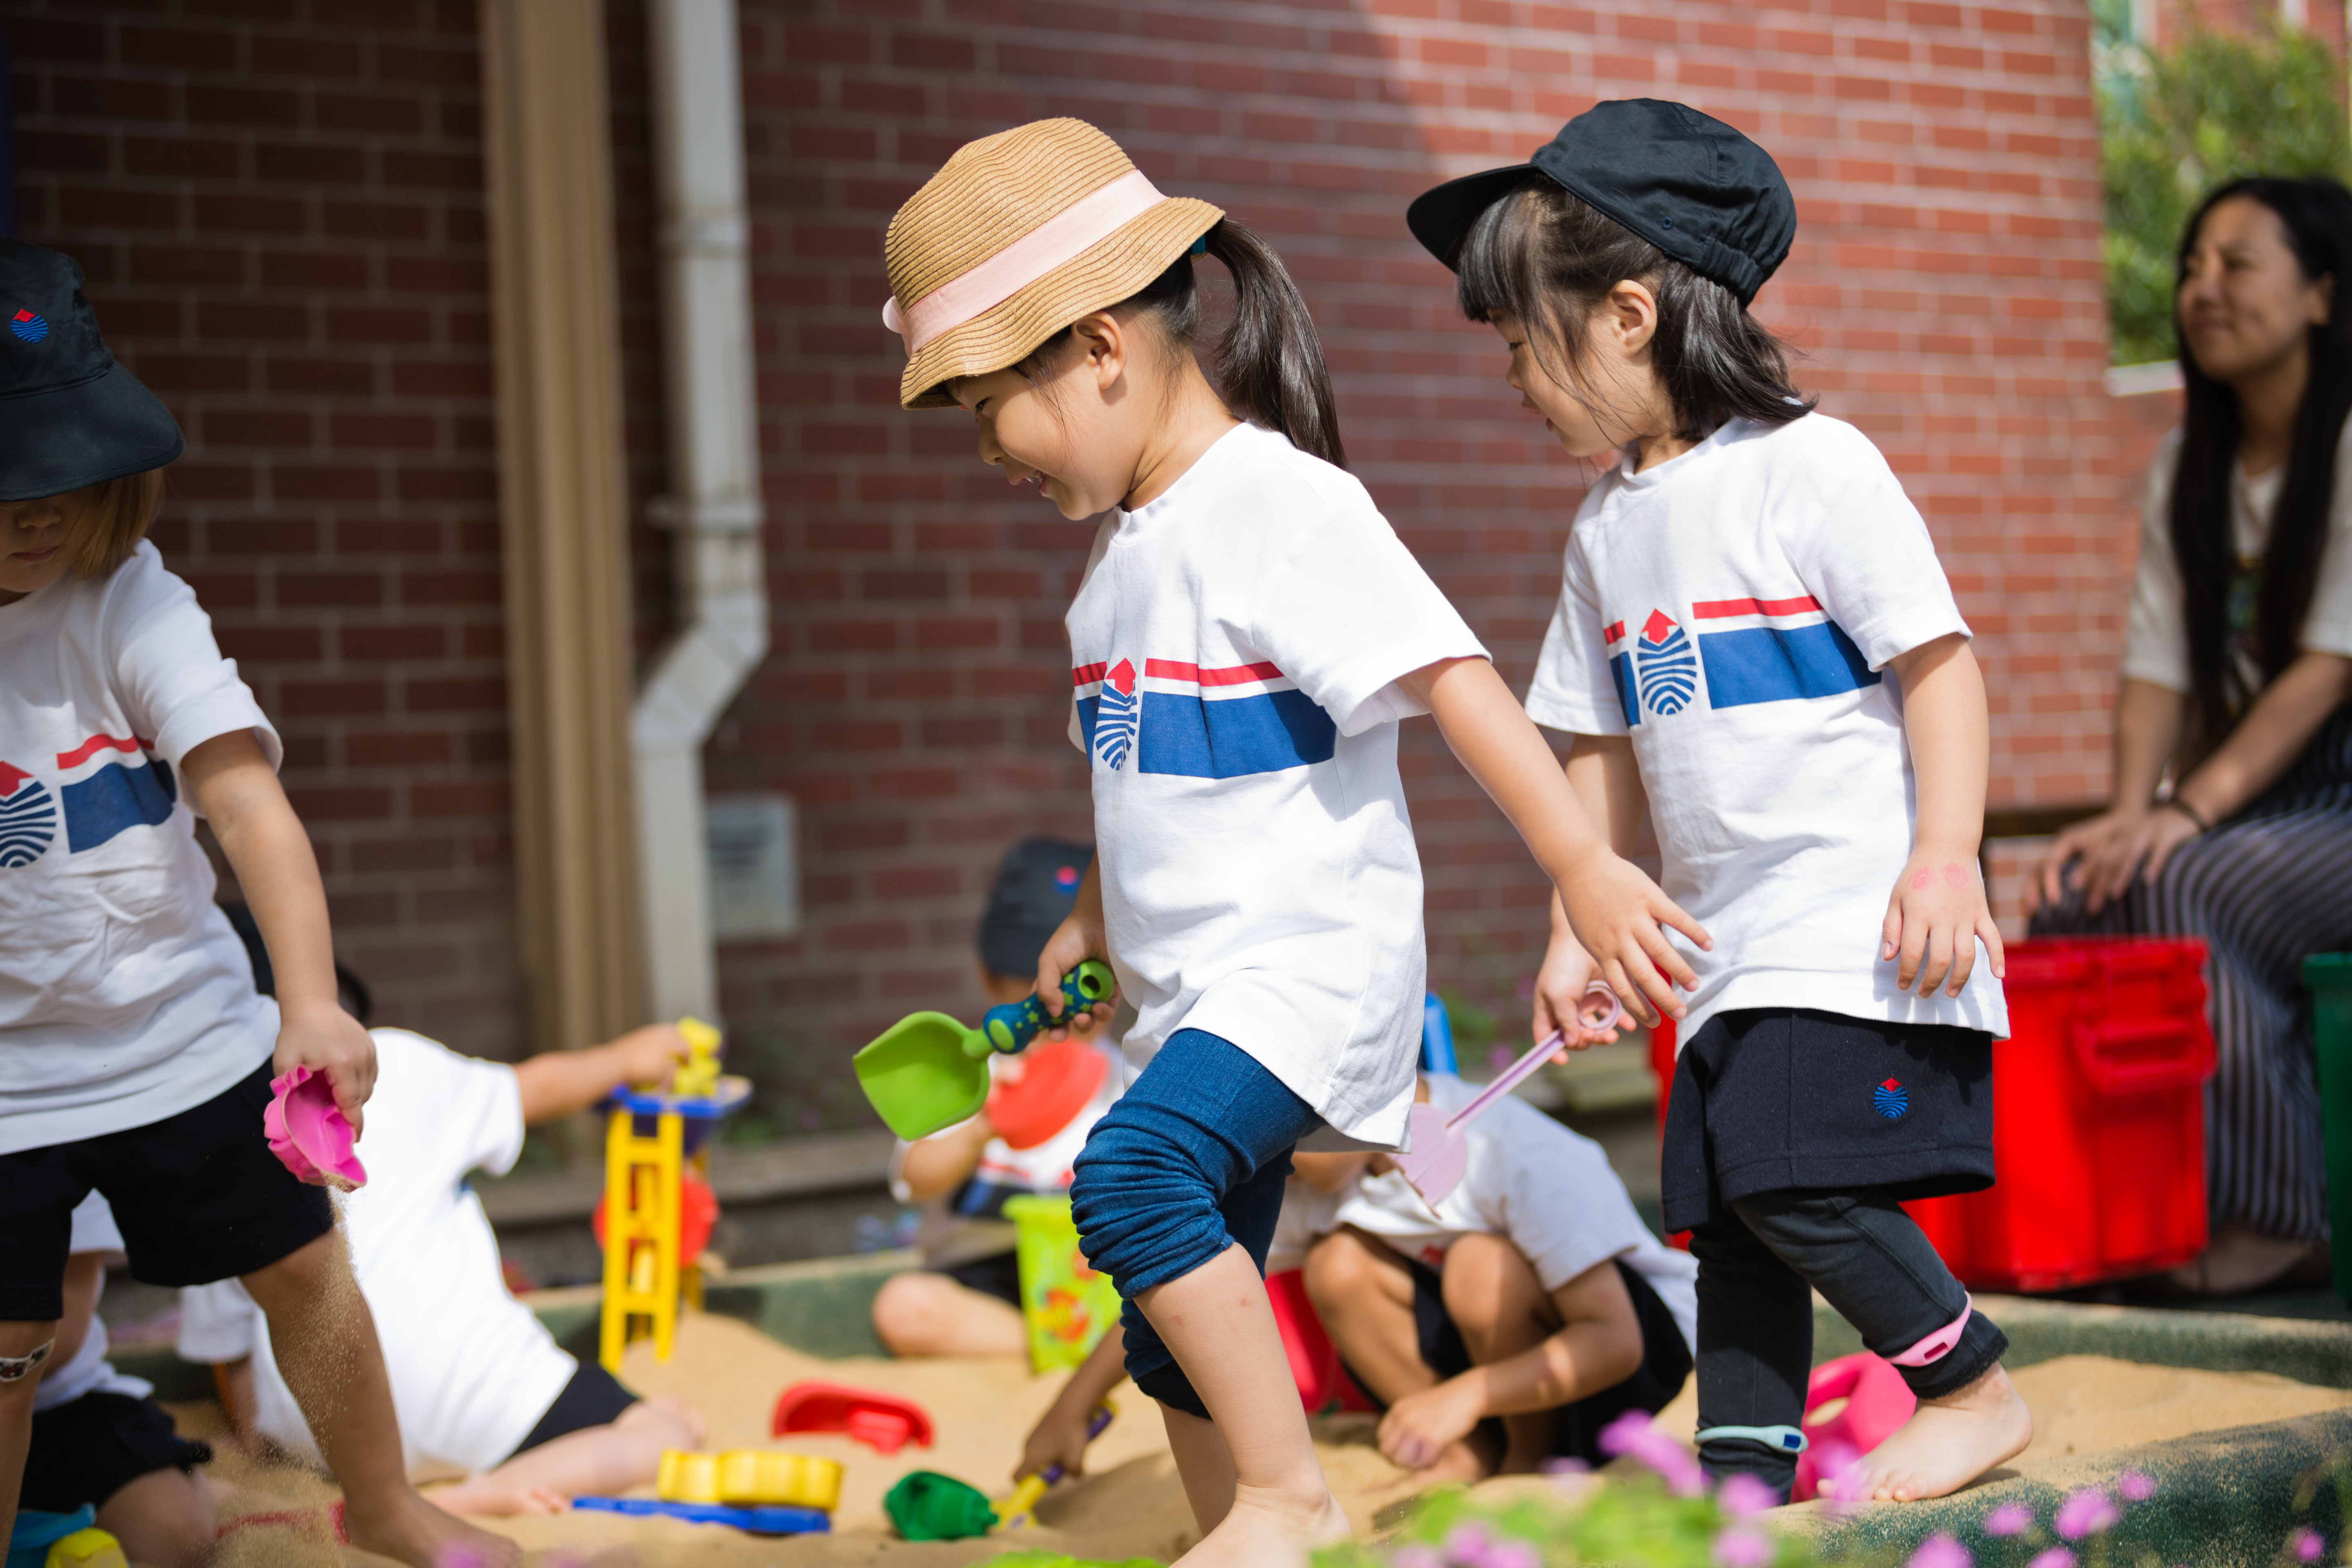 All forms of learning, including physical, social, emotional and cognitive development, are rooted in play.